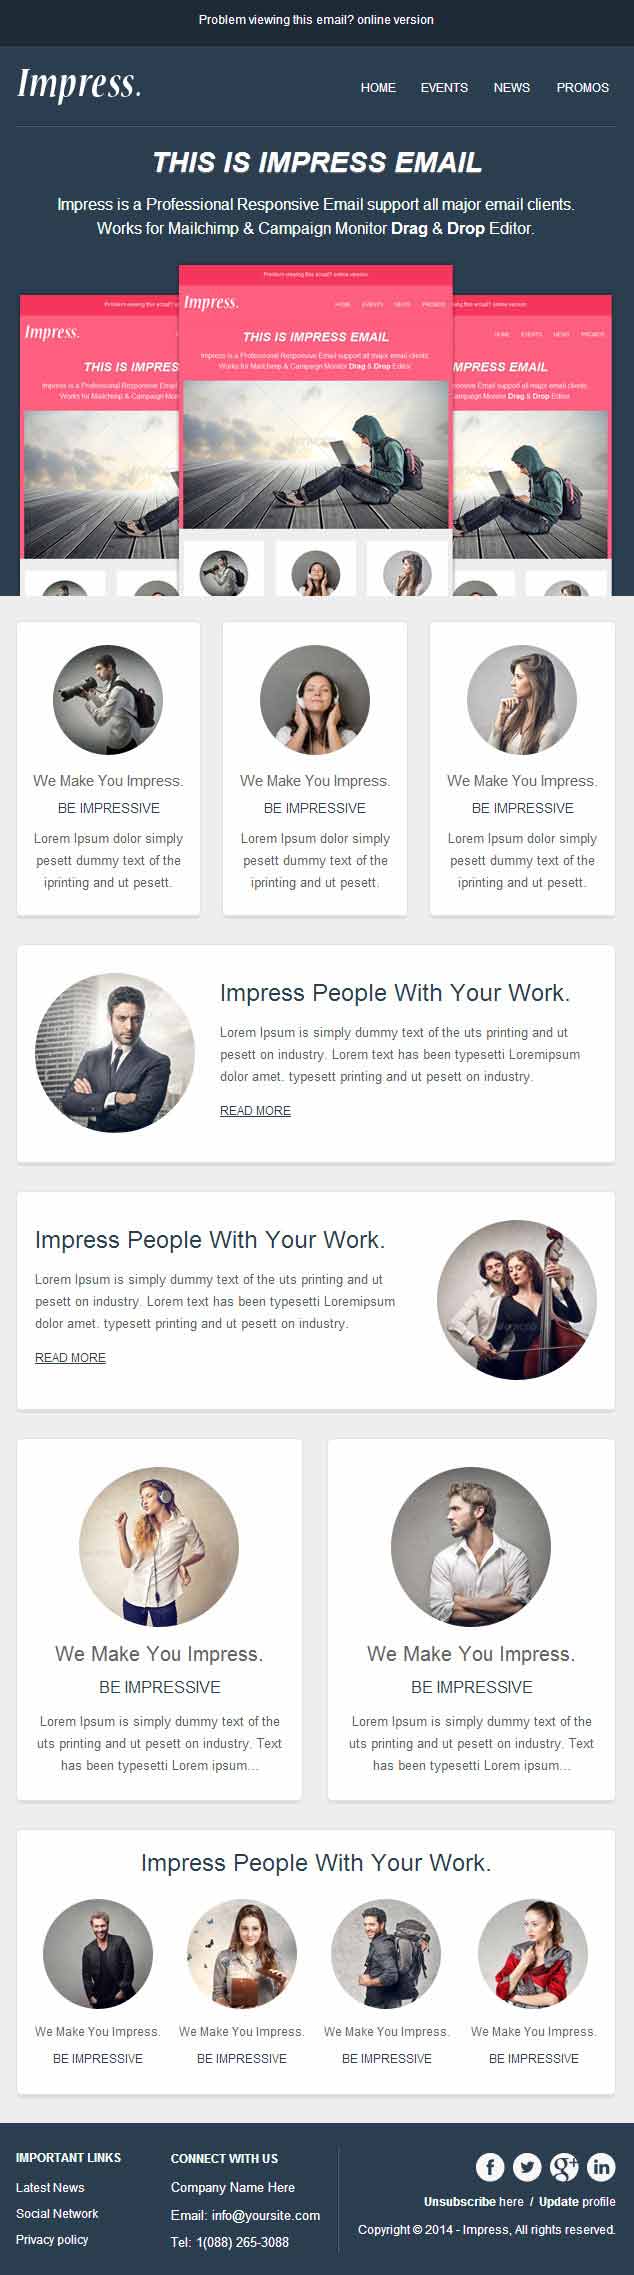 impress Responsive Email Template